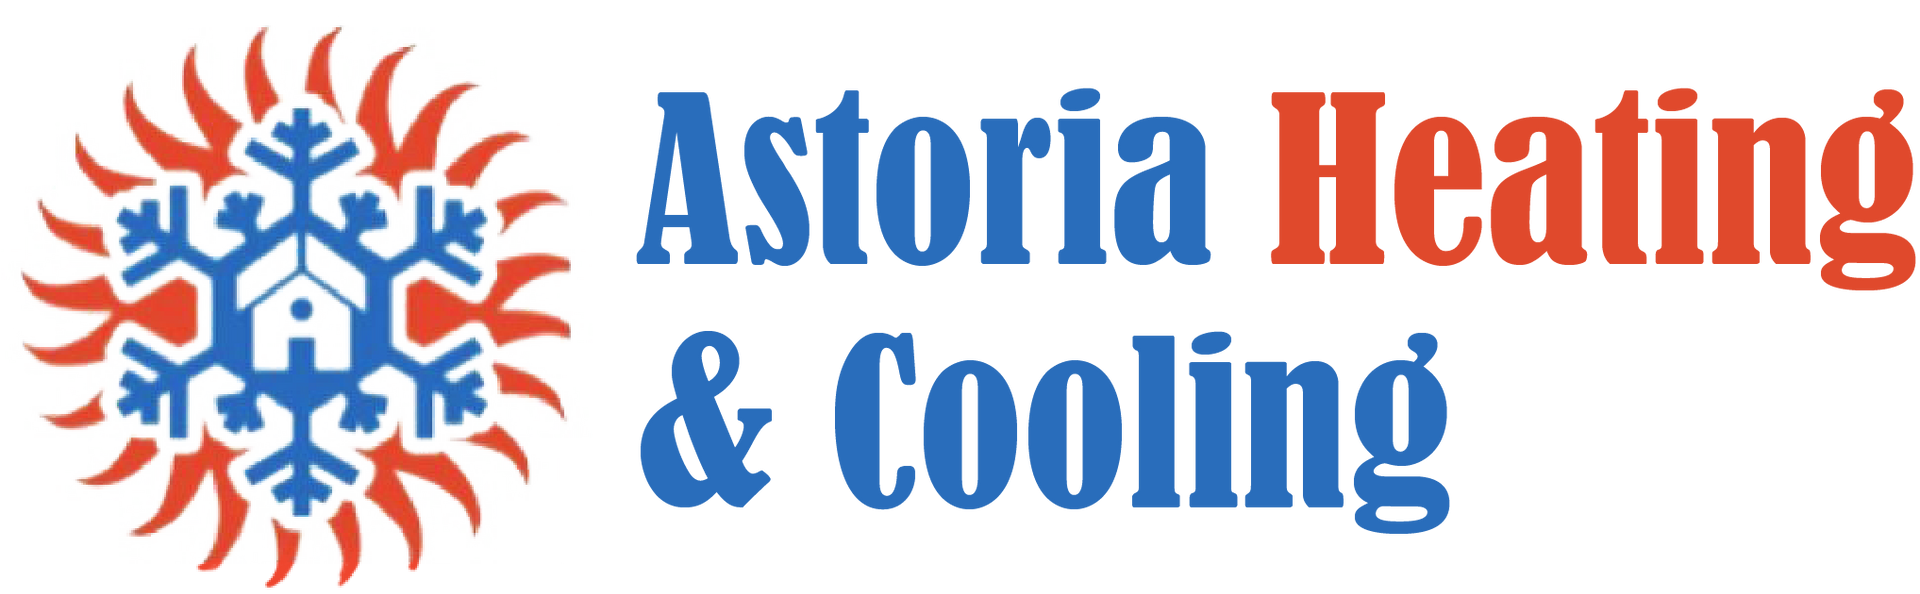 Astoria heating and cooling logo